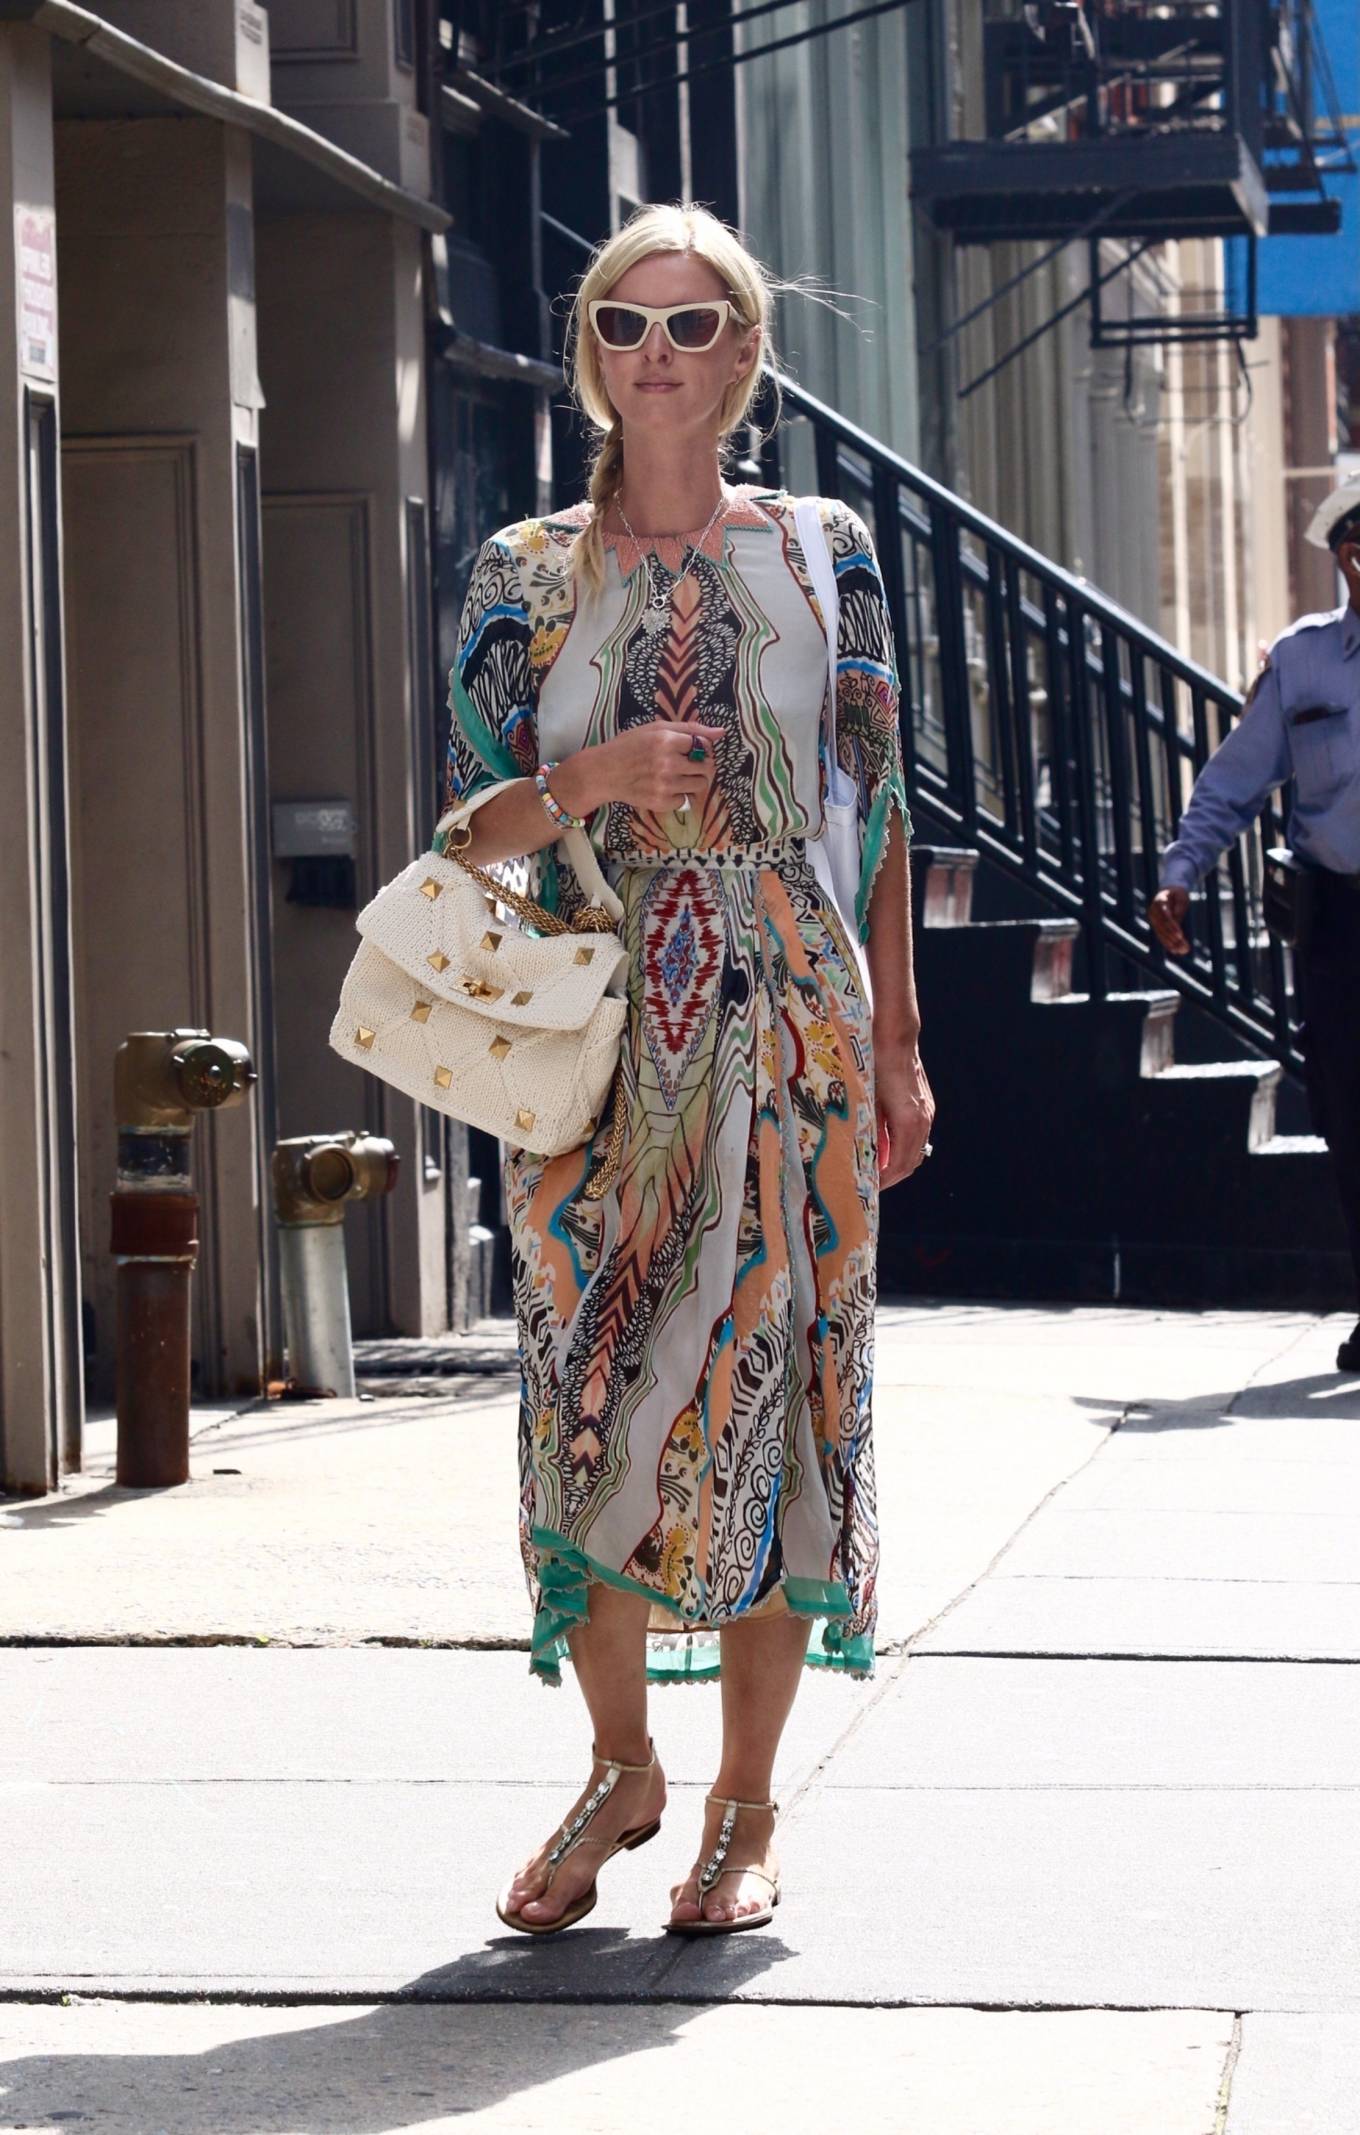 Nicky Hilton 2021 : Nicky Hilton – In a colorful summery dress out on Labor Day Weekend in Manhattan’s Soho area-10